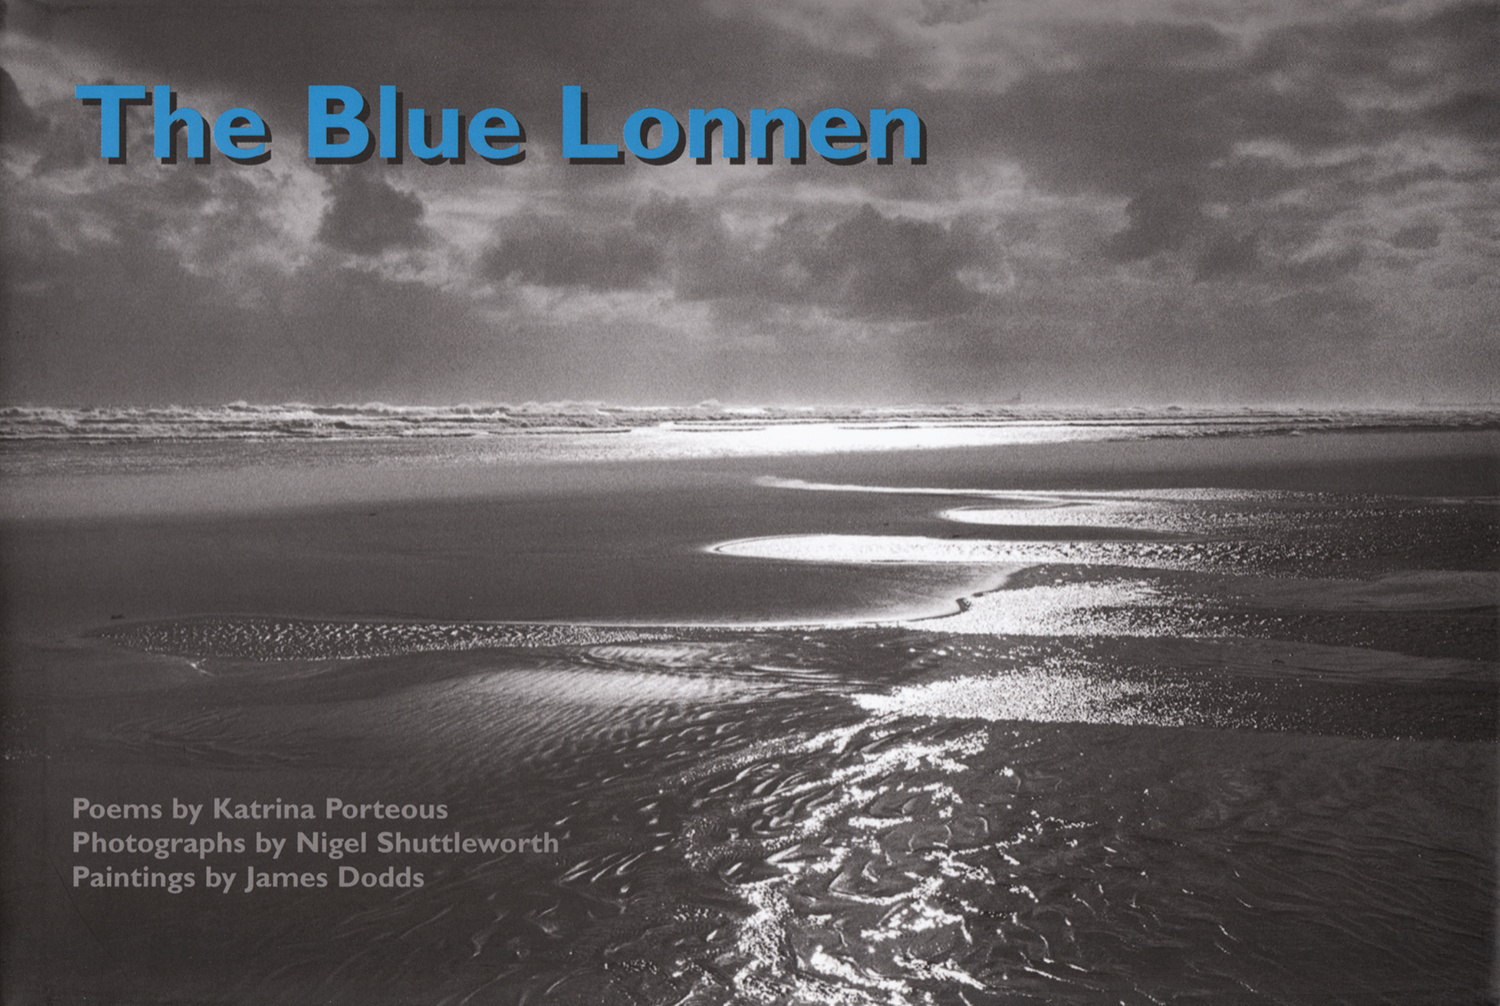 The Blue Lonnen by James Dodds